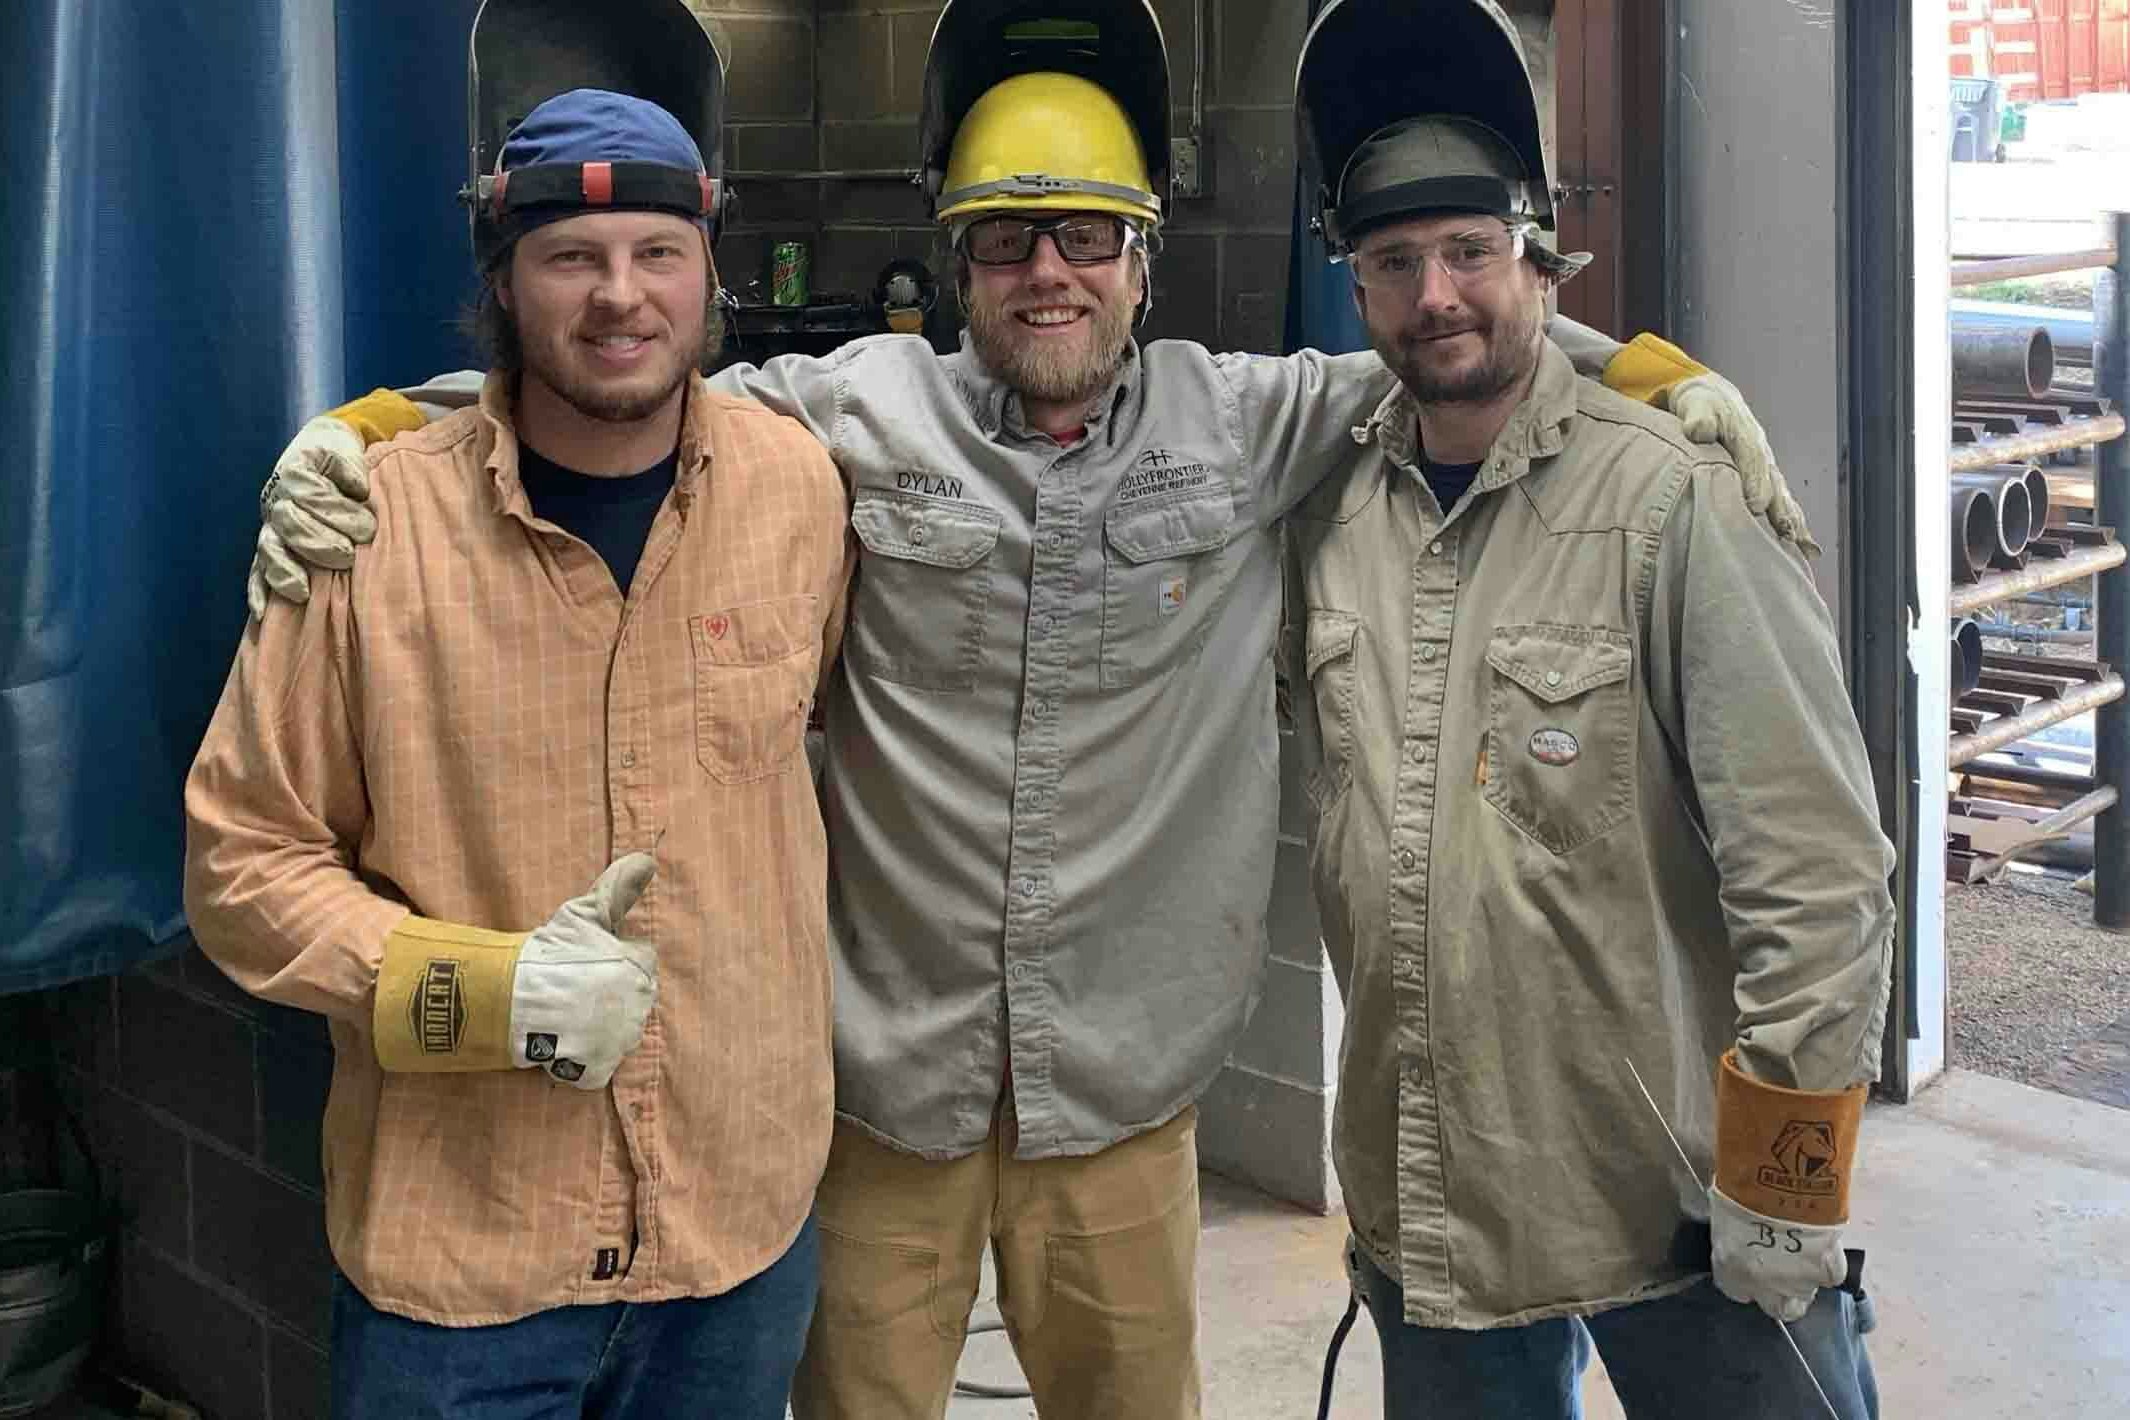 At the Plumbers and Pipe Fitters Union in Cheyenne, students learning their trades are more focused on working and completing their programs than soicial and political issues.